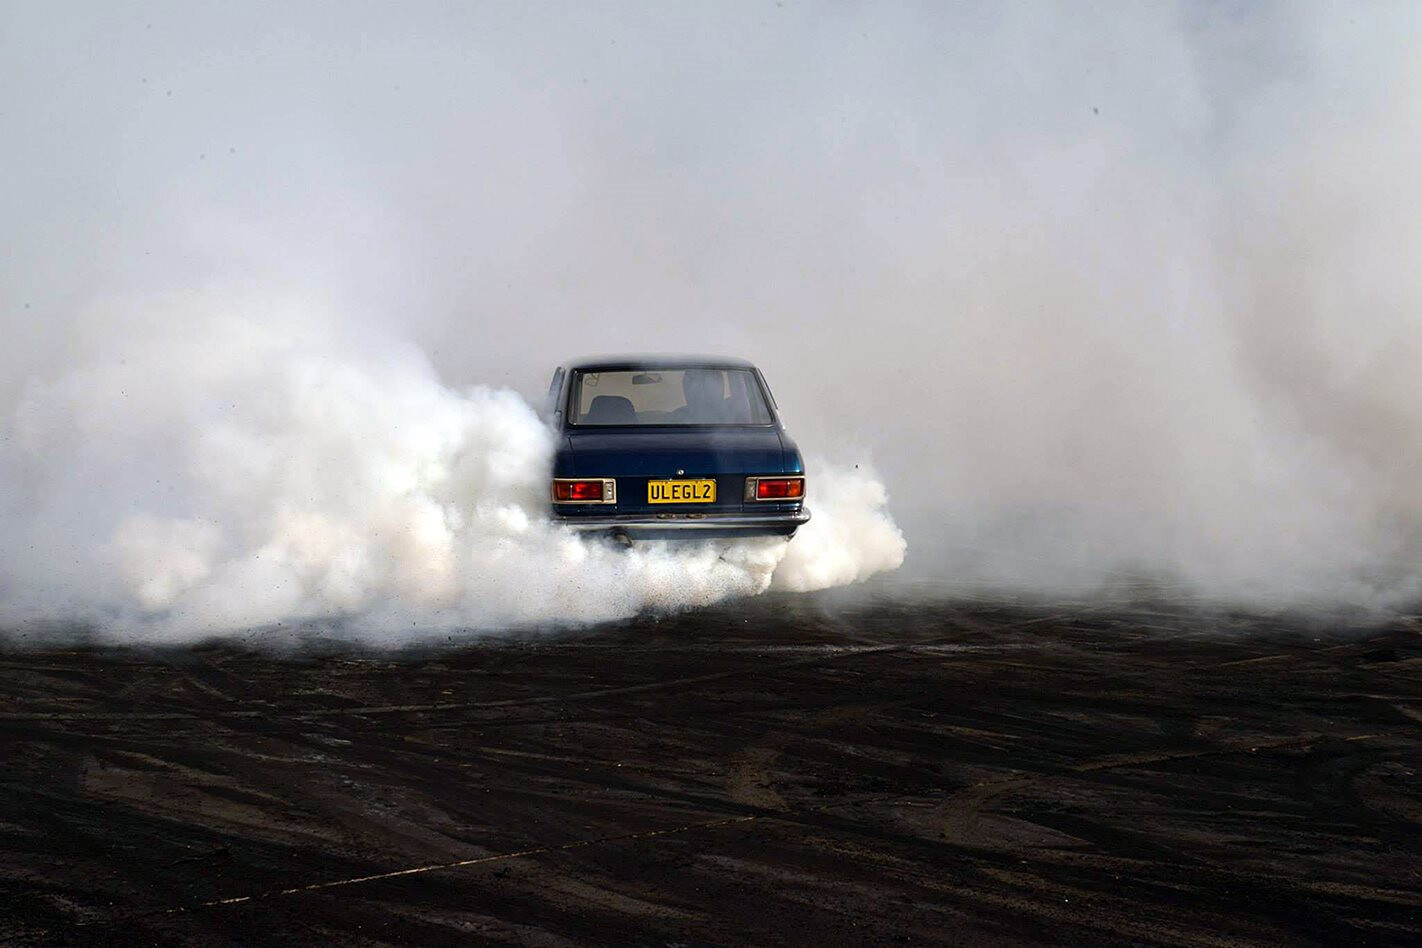 VIDEO: MICK BRASHER FRYING TYRES WITH A TURBO V8 COROLLA